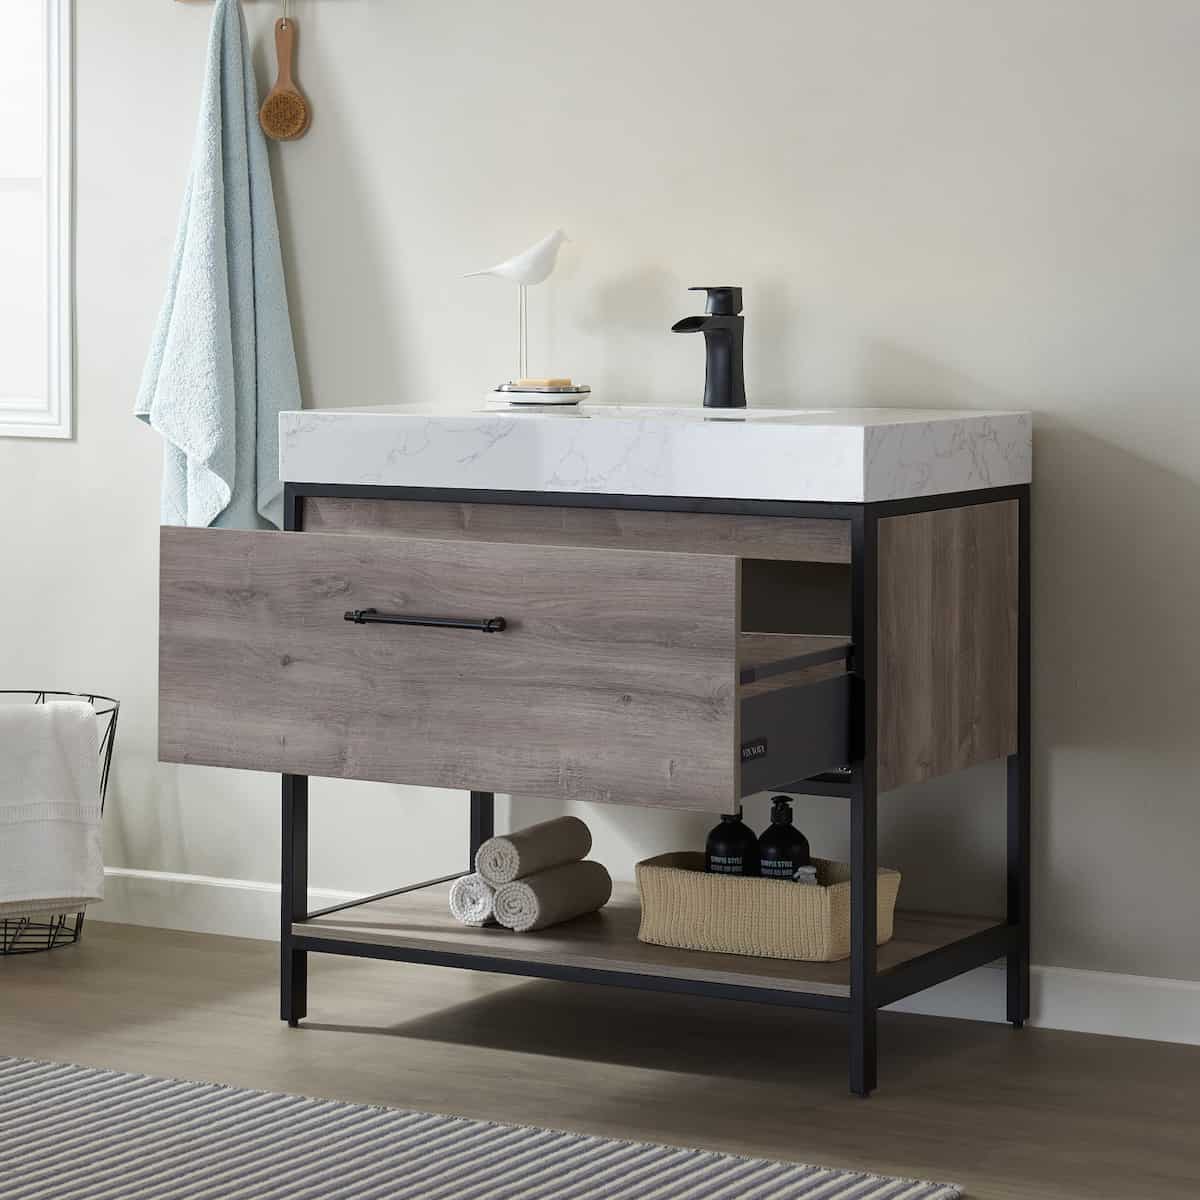 Vinnova Palma 36 Inch Freestanding Single Vanity In Mexican Oak with White Composite Grain Stone Countertop Without Mirror Drawer 701236-MXO-GW-NM